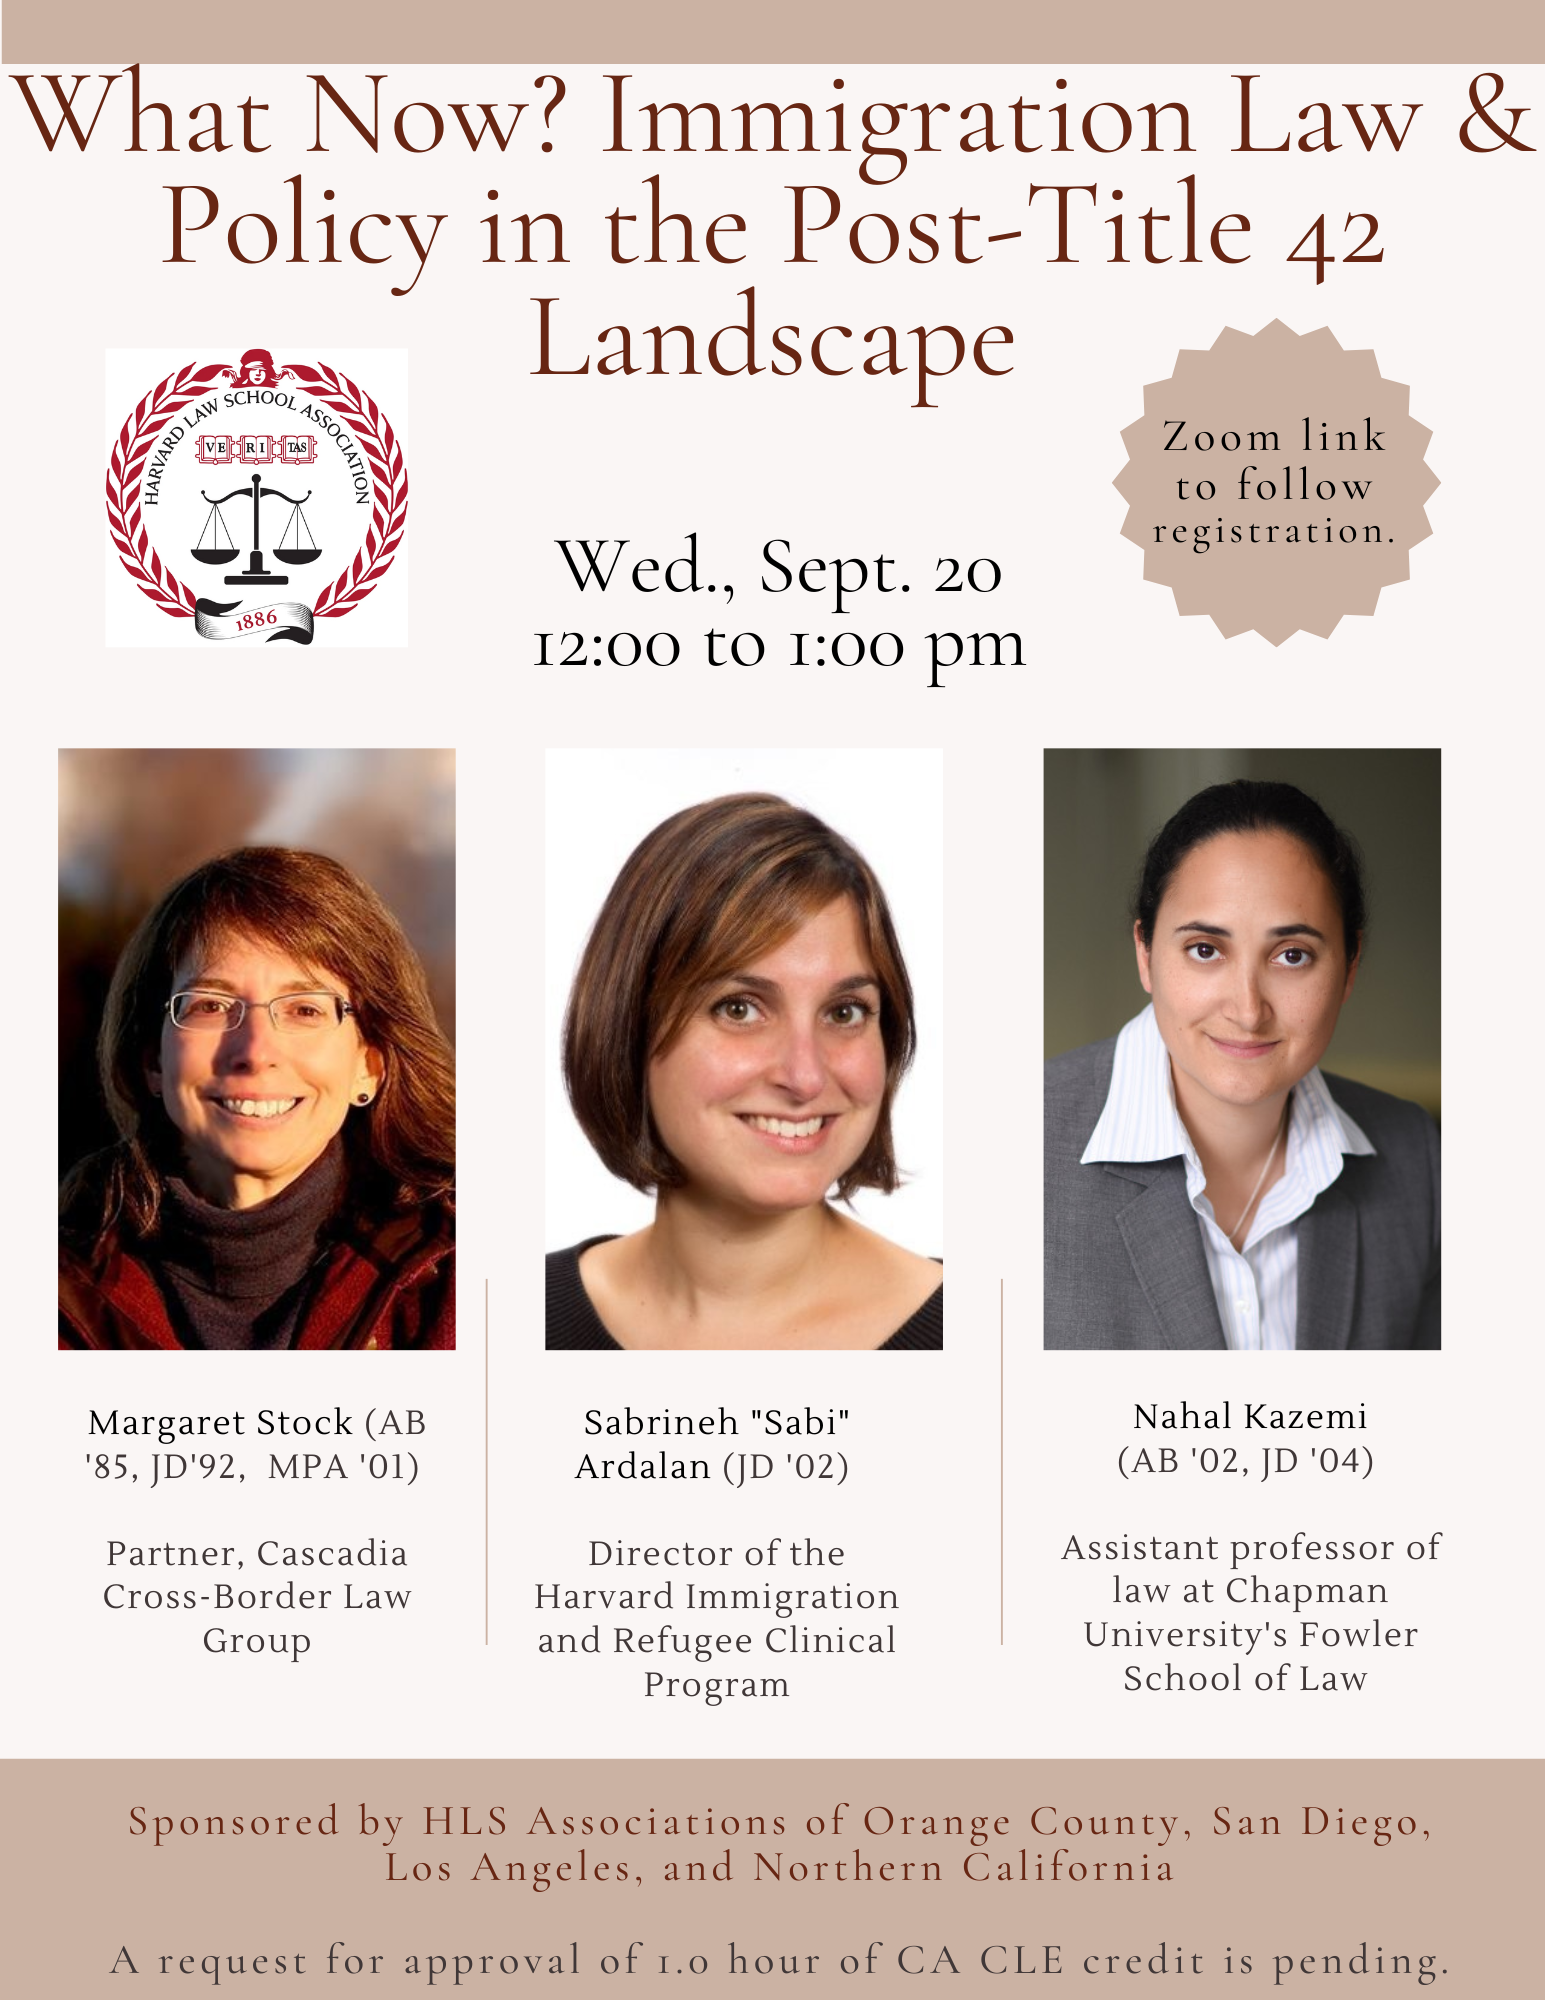 "What Now? Immigration Law & Policy in the Post-Title 42 Landscape" Flyer